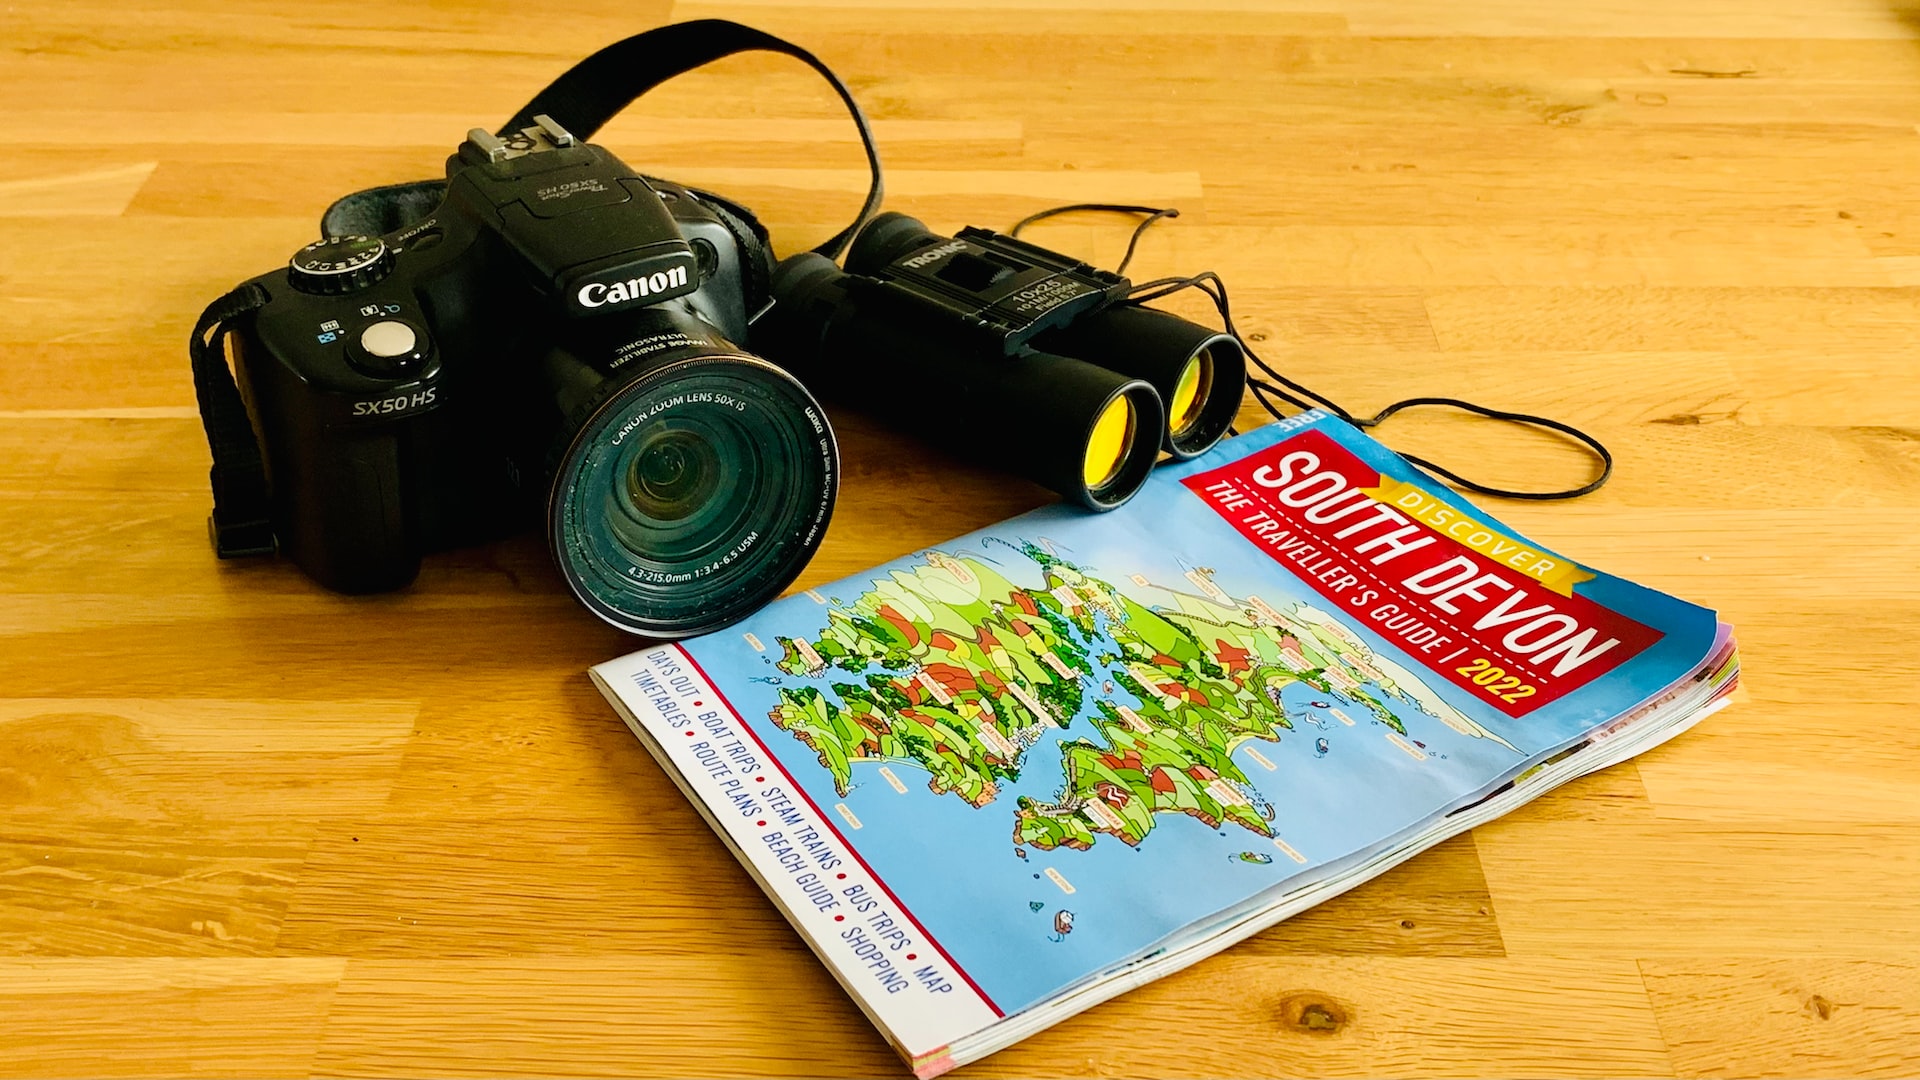 Camera, binoculars and a map on a wooden table